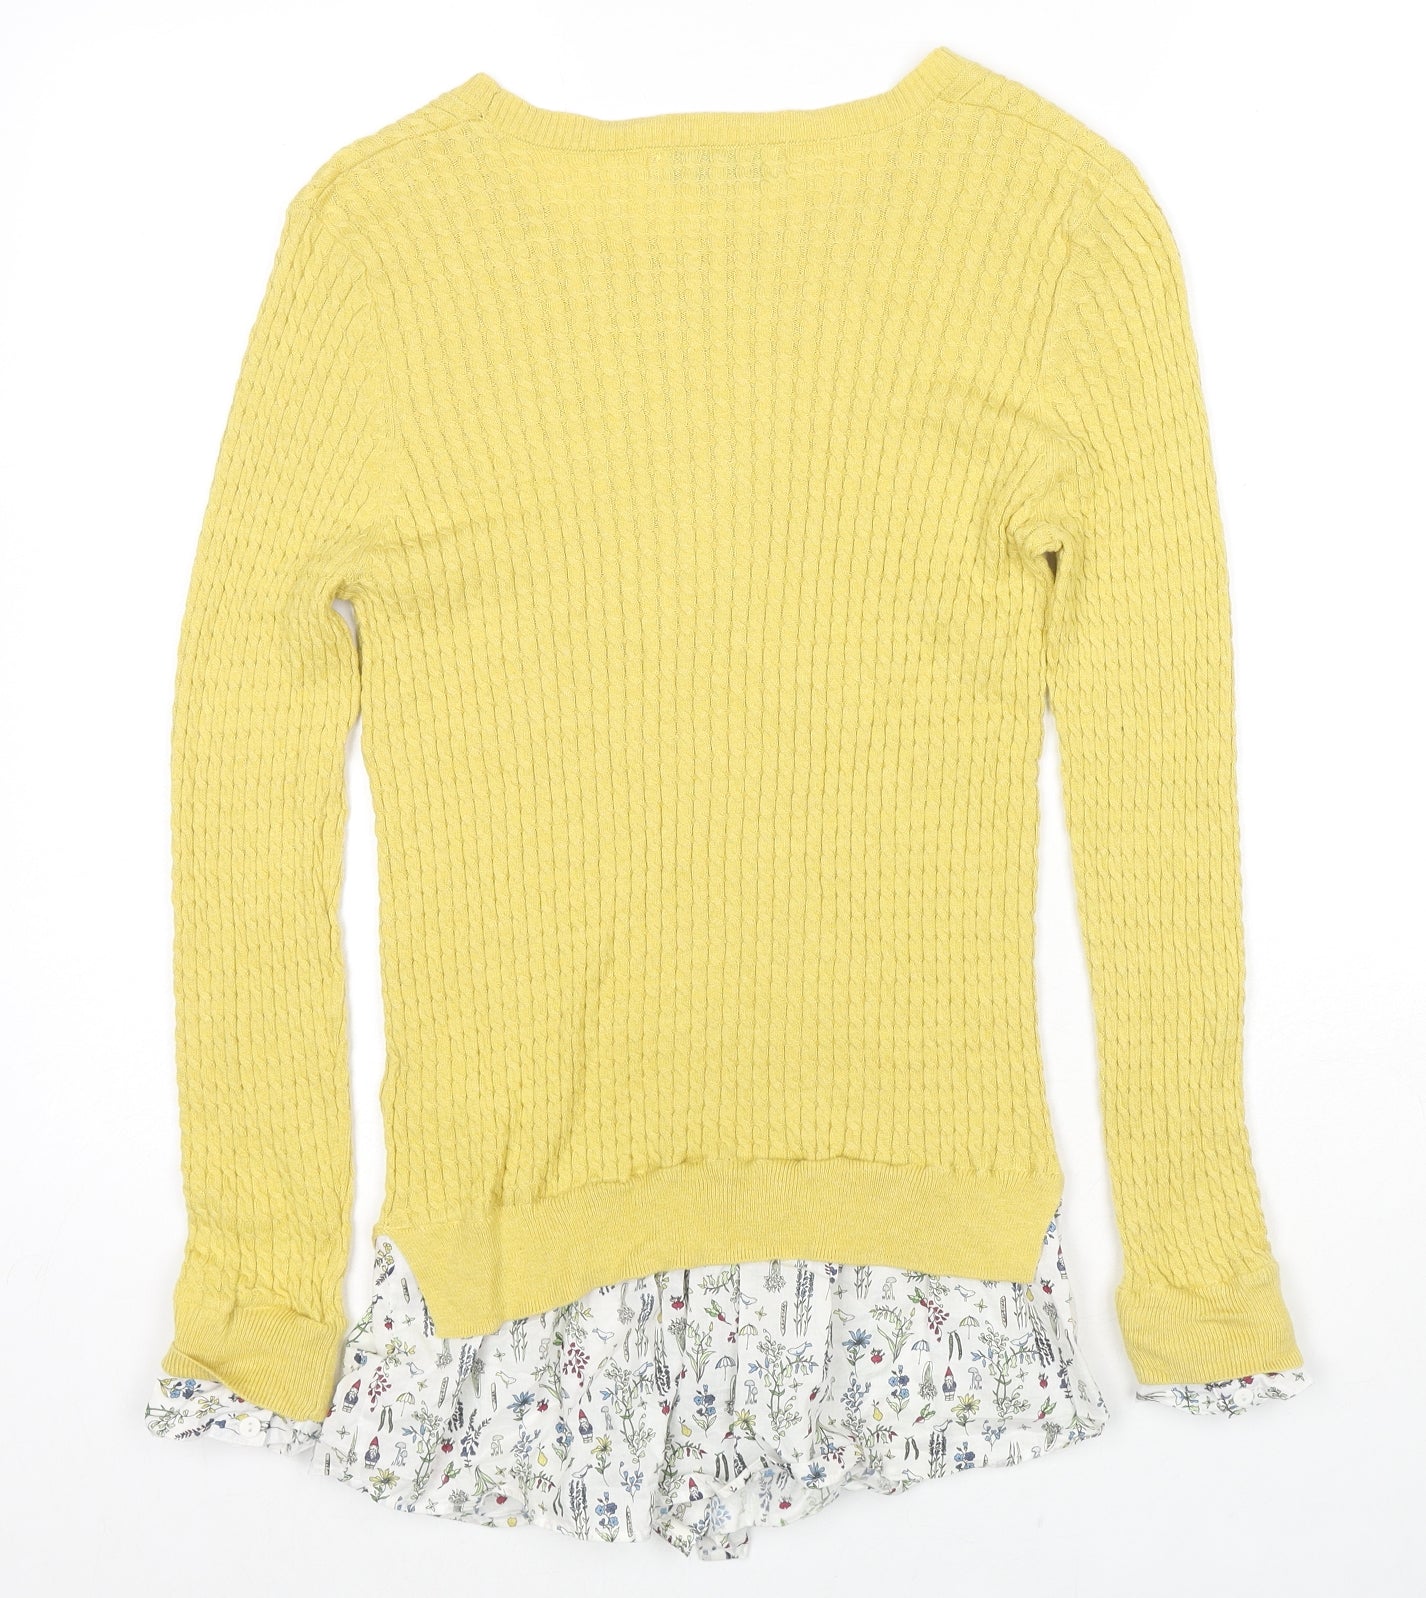 NEXT Womens Yellow Boat Neck Cotton Pullover Jumper Size 12